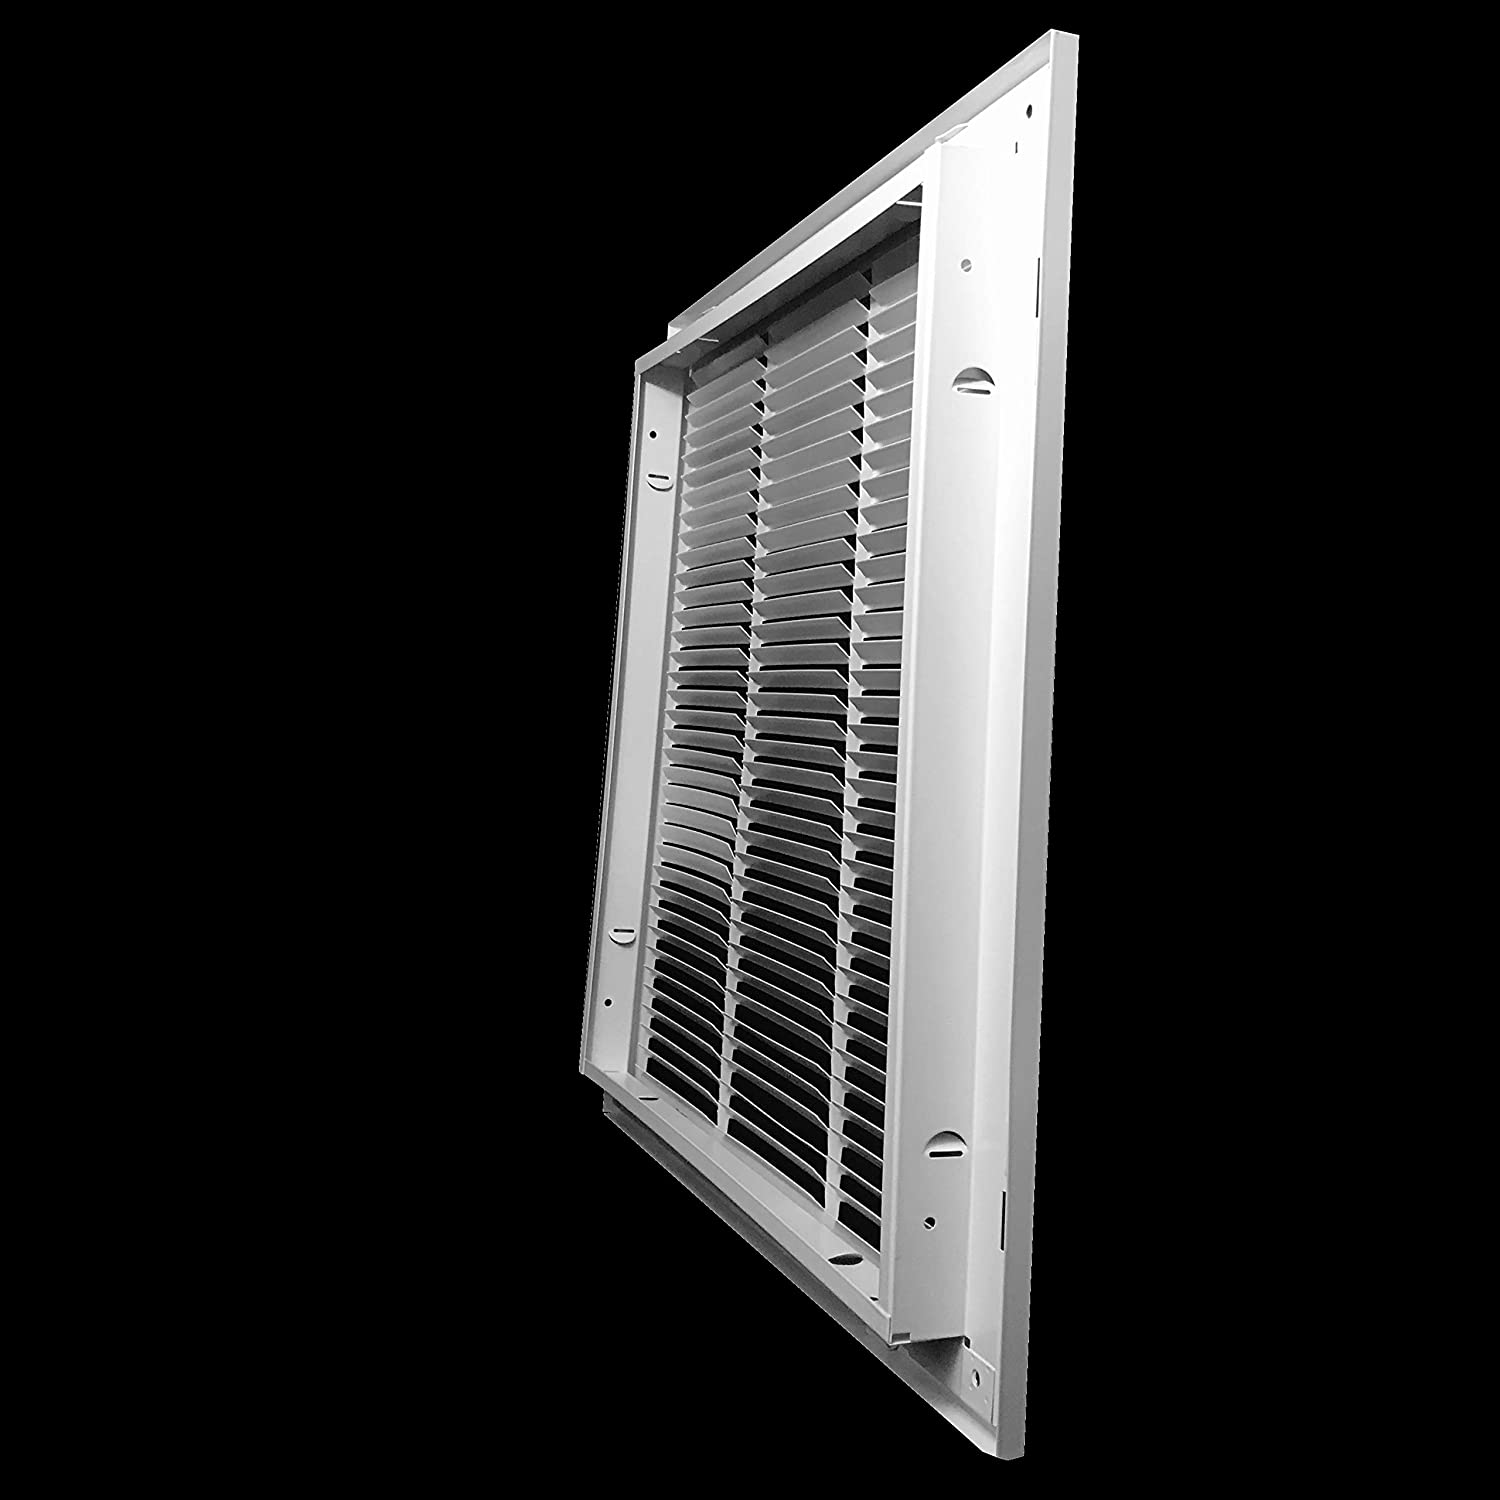 14" X 6" Duct Opening | Steel Return Air Filter Grille for Sidewall and Ceiling